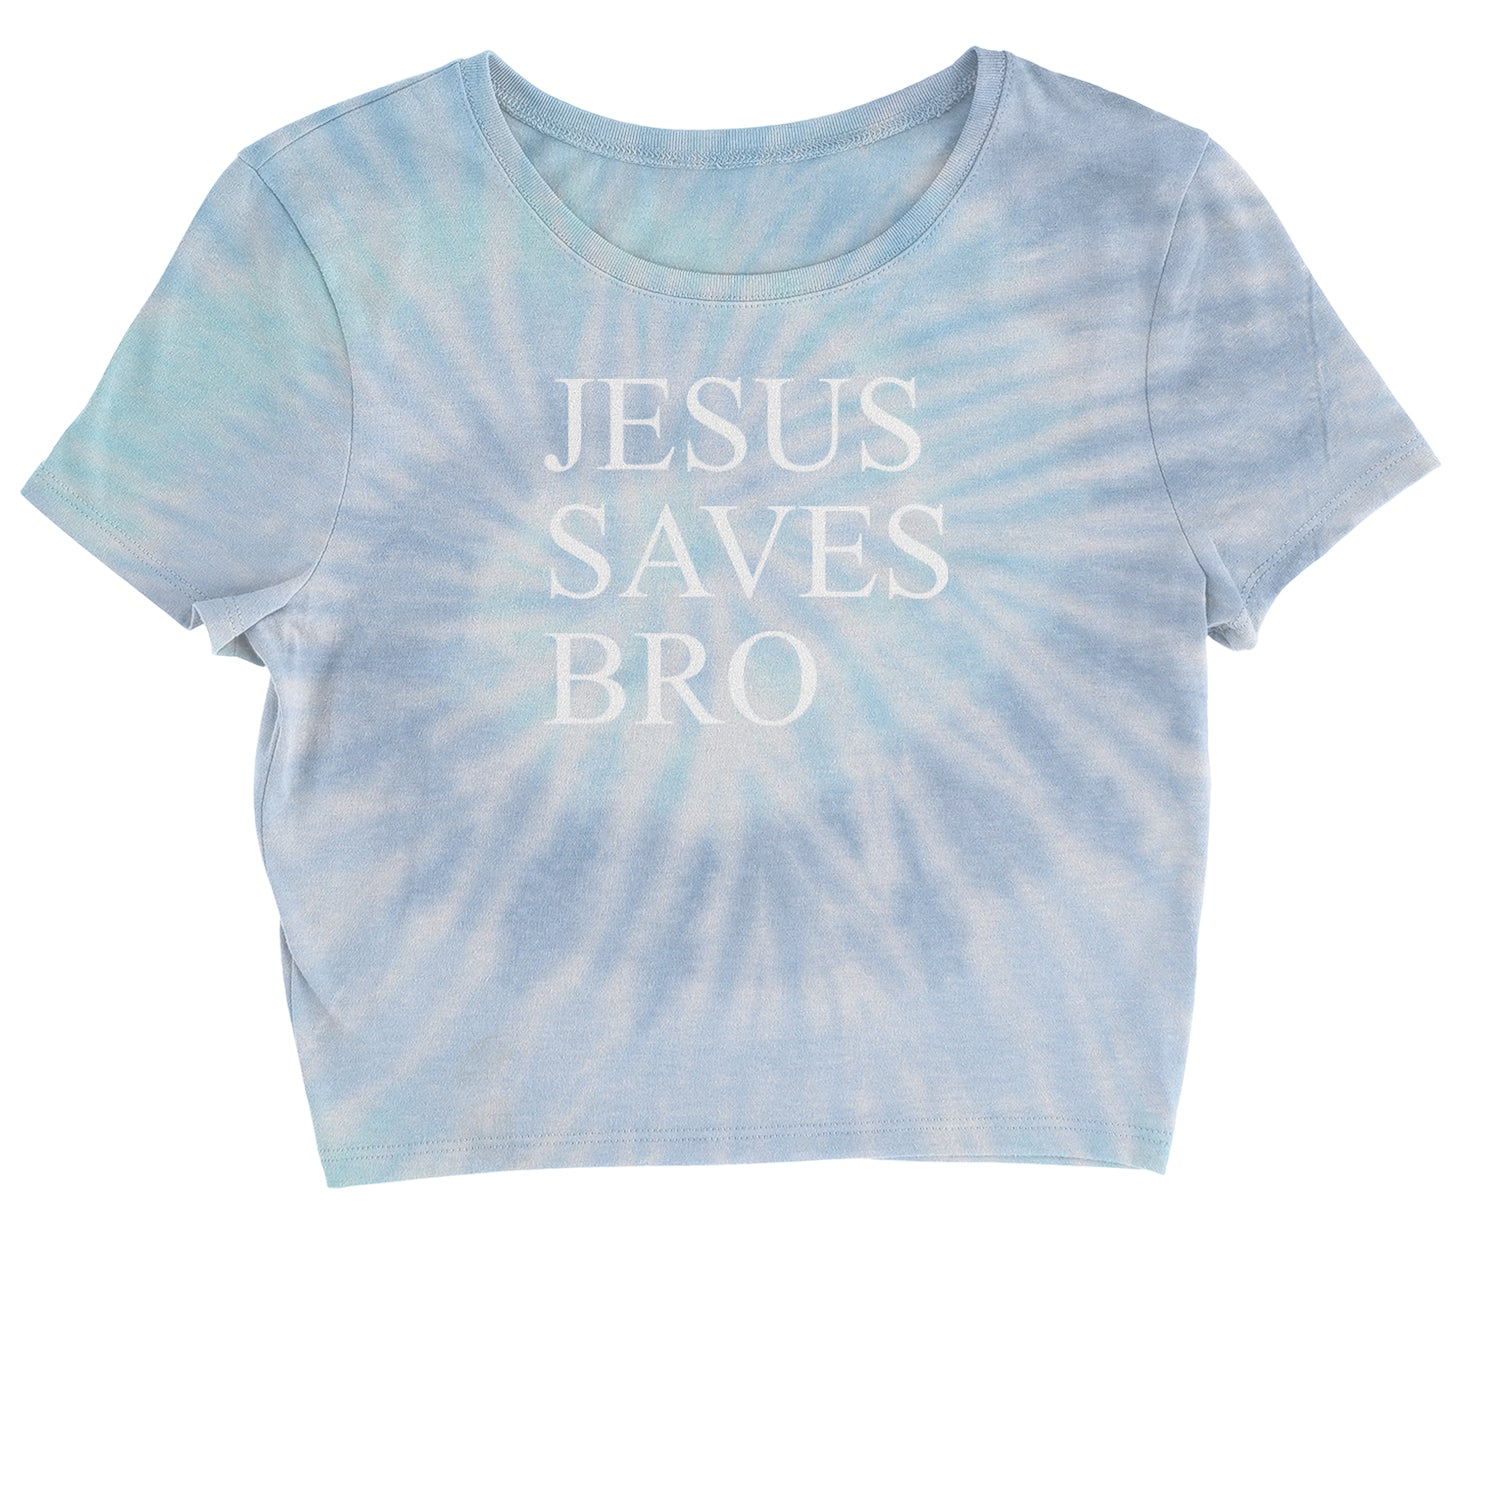 Jesus Saves Bro Cropped T-Shirt catholic, christian, christianity, church, jesus, religion, religuous by Expression Tees